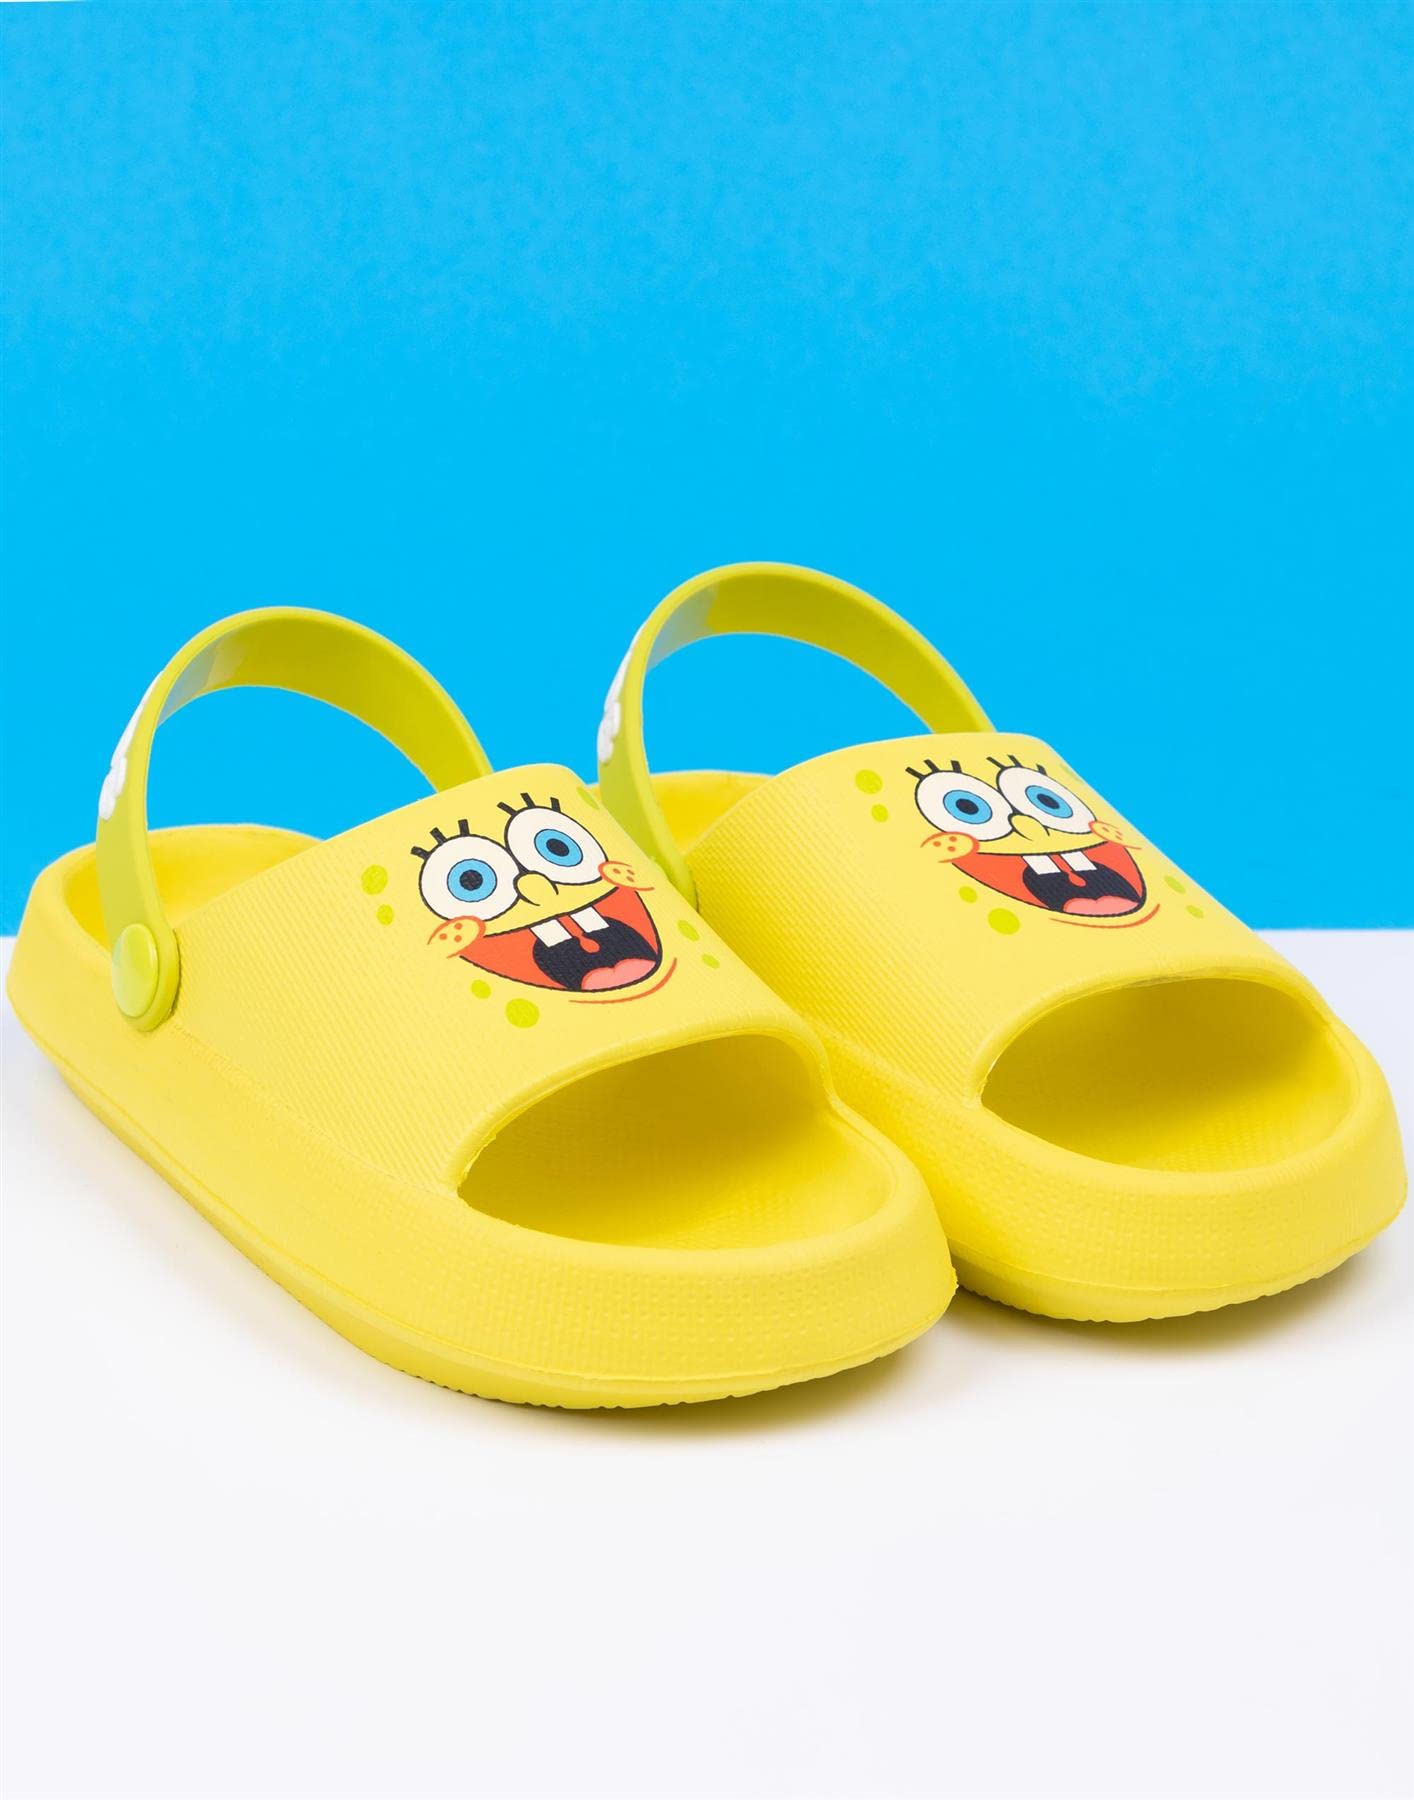 SpongeBob Squarepants Kids Sandals | Boys & Girls Sliders with Supportive Strap for Toddlers | Slip-on Summer Play Footwear